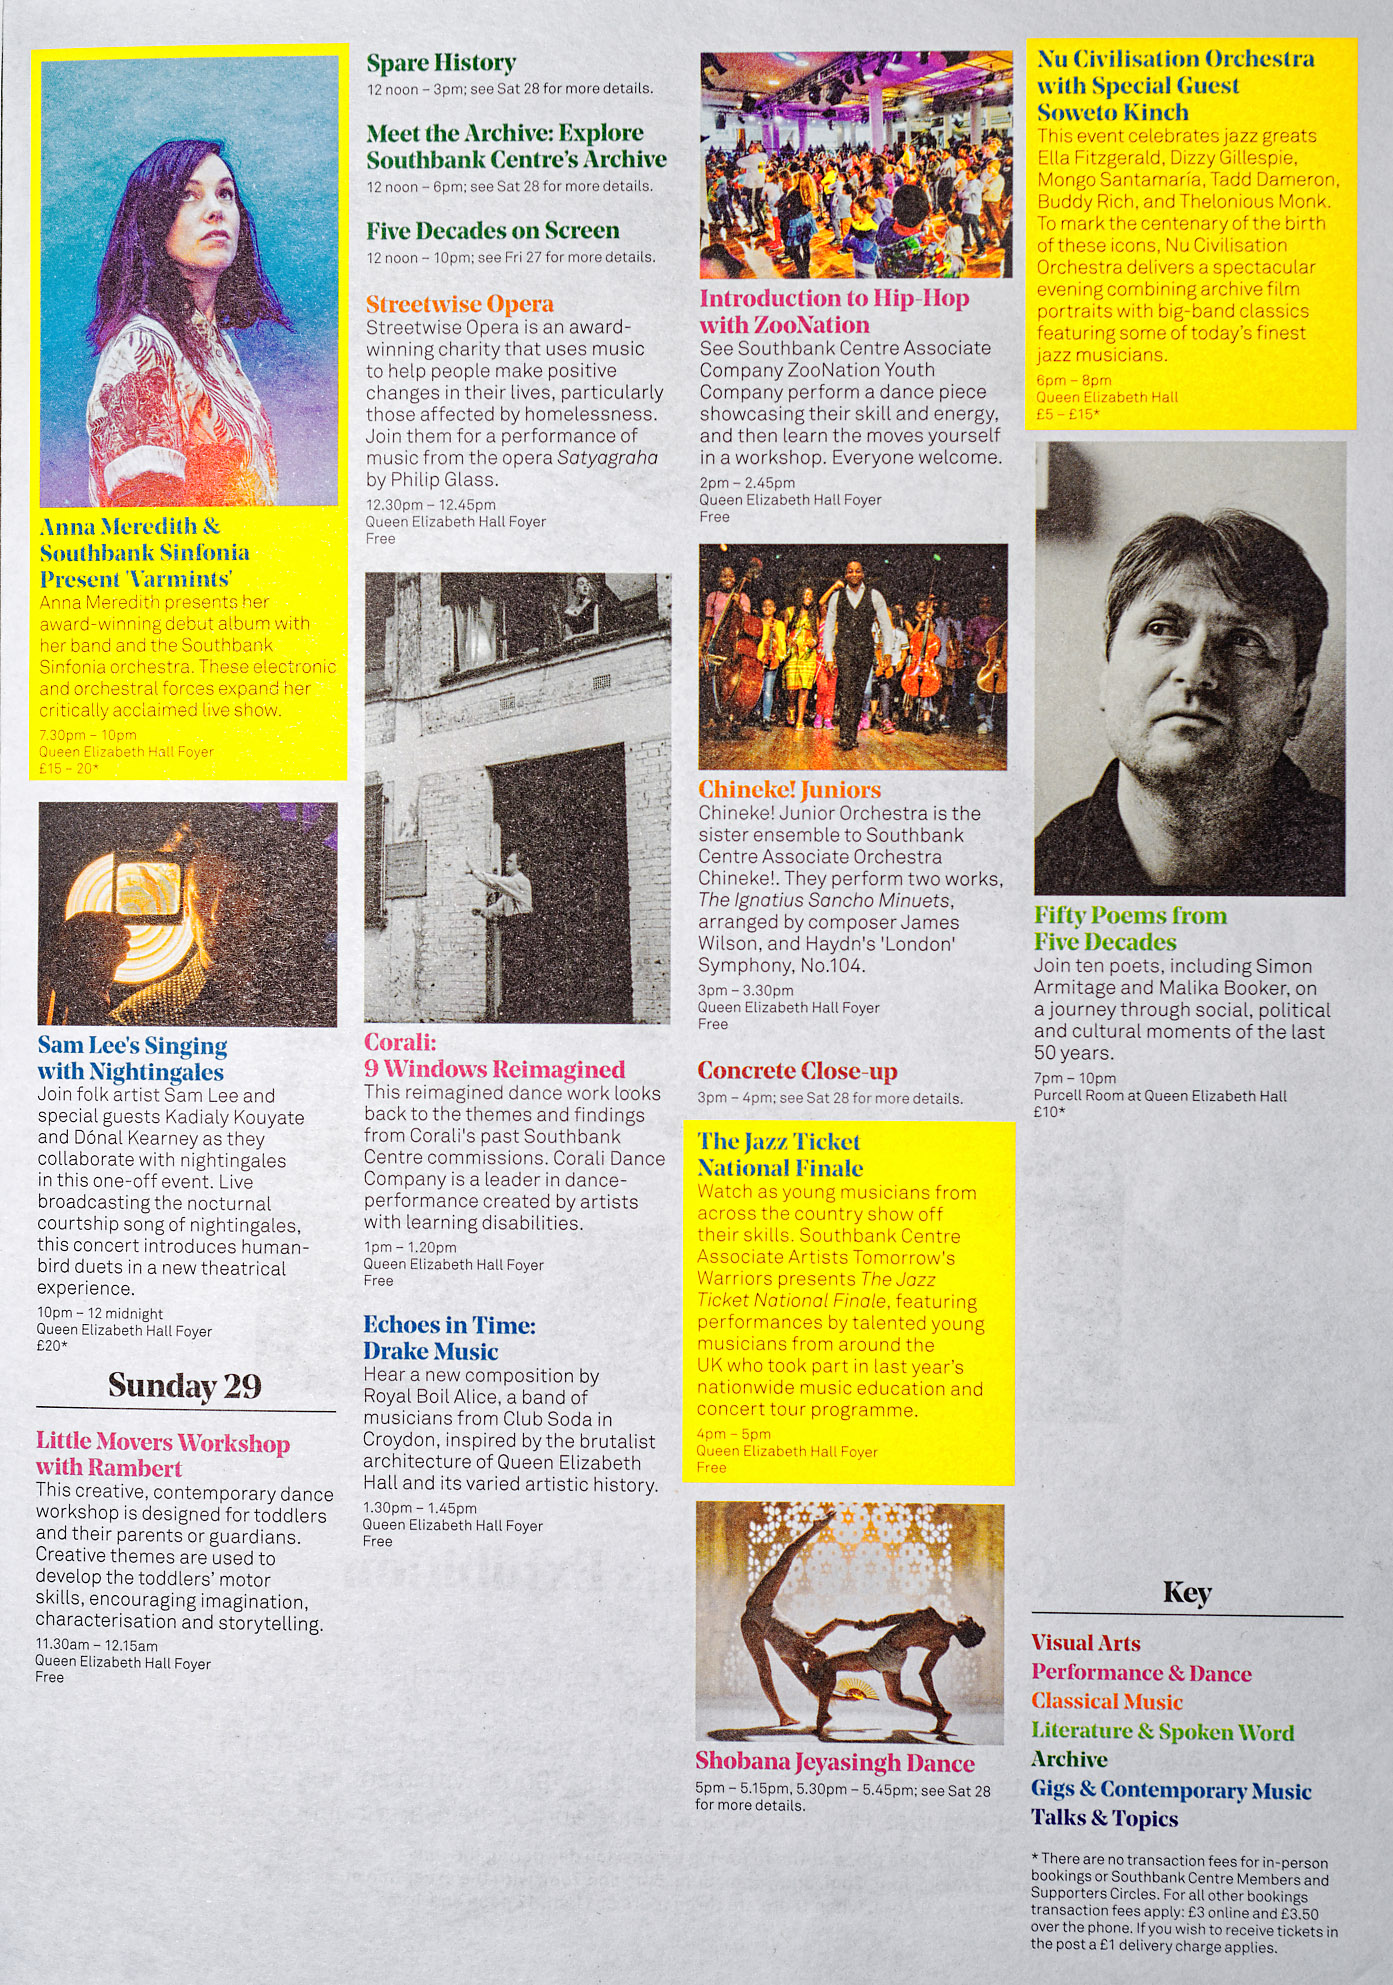 Corali feature in Southbank Centre magazine 1997 